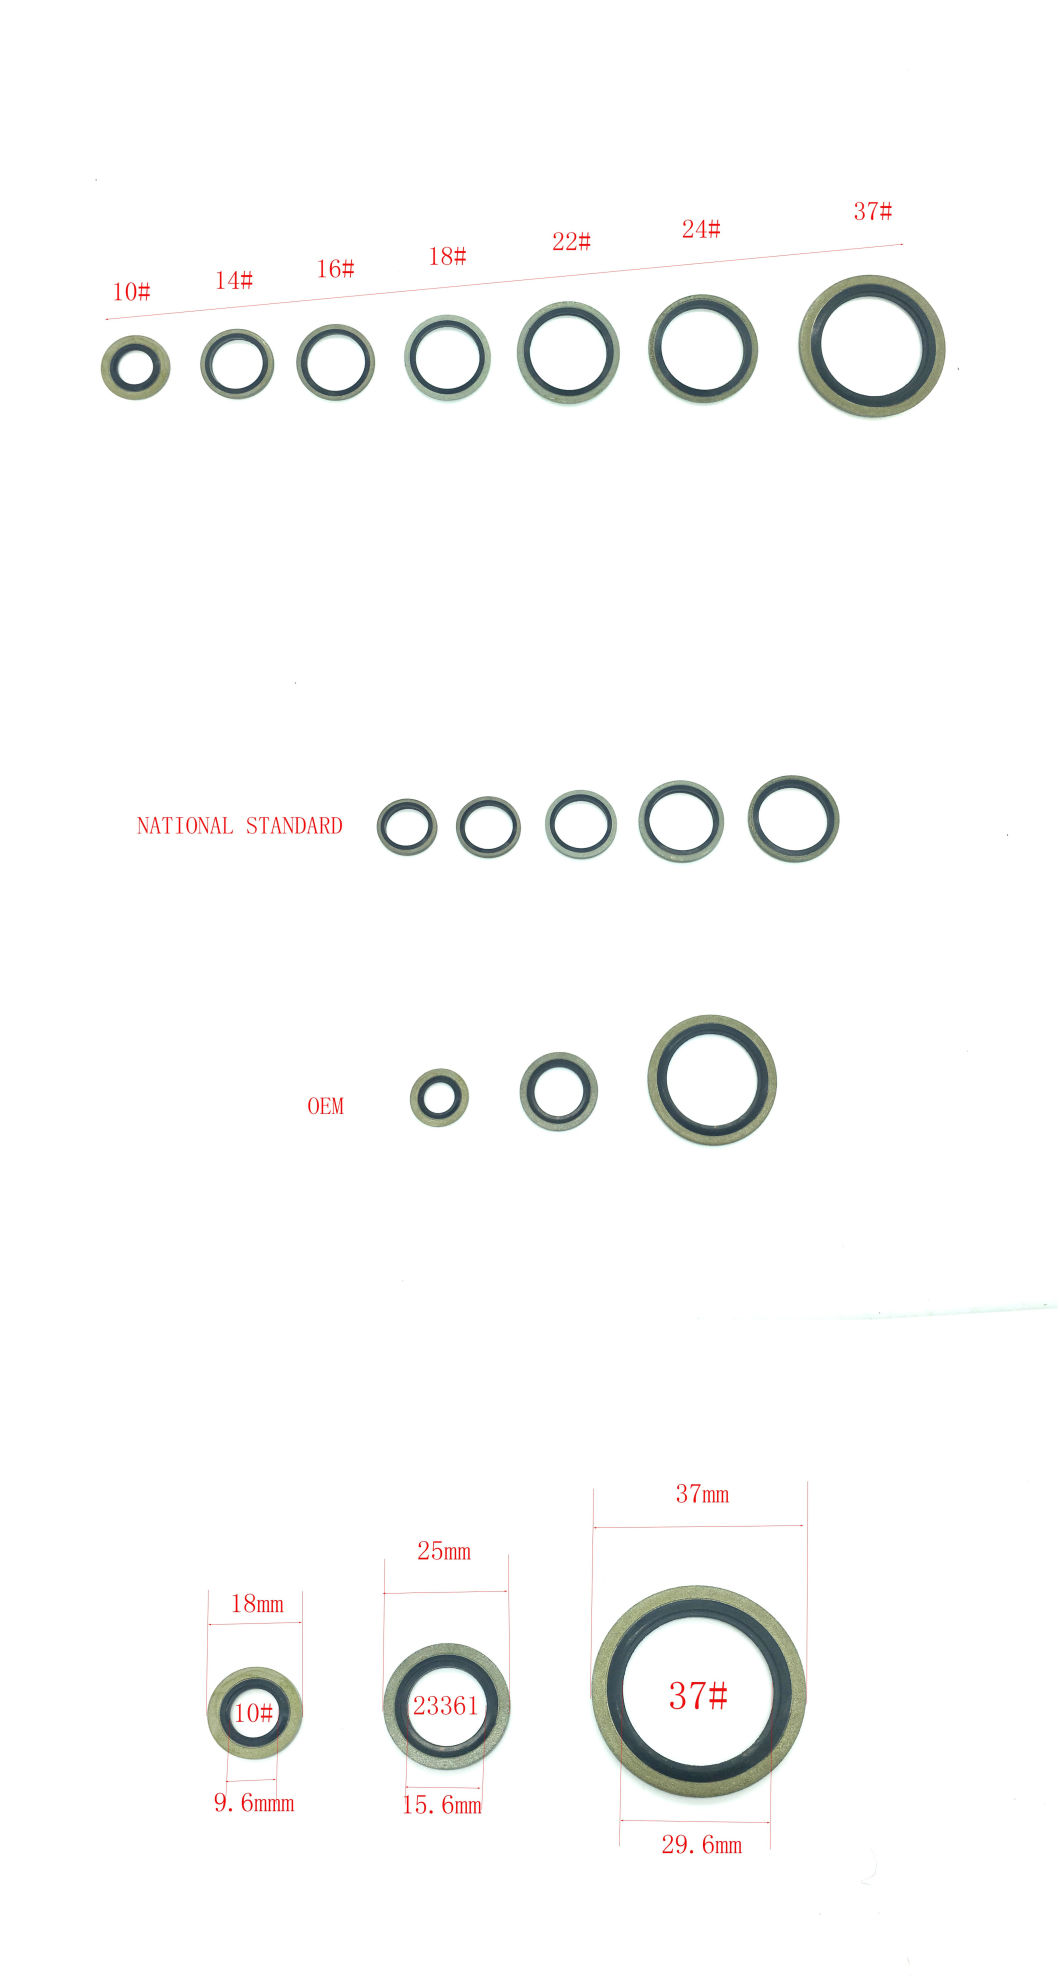 High Quality Stainless Steel Dowty Seal Gasket Galvanized NBR FKM EPDM Rubber Bonded Seal Washer